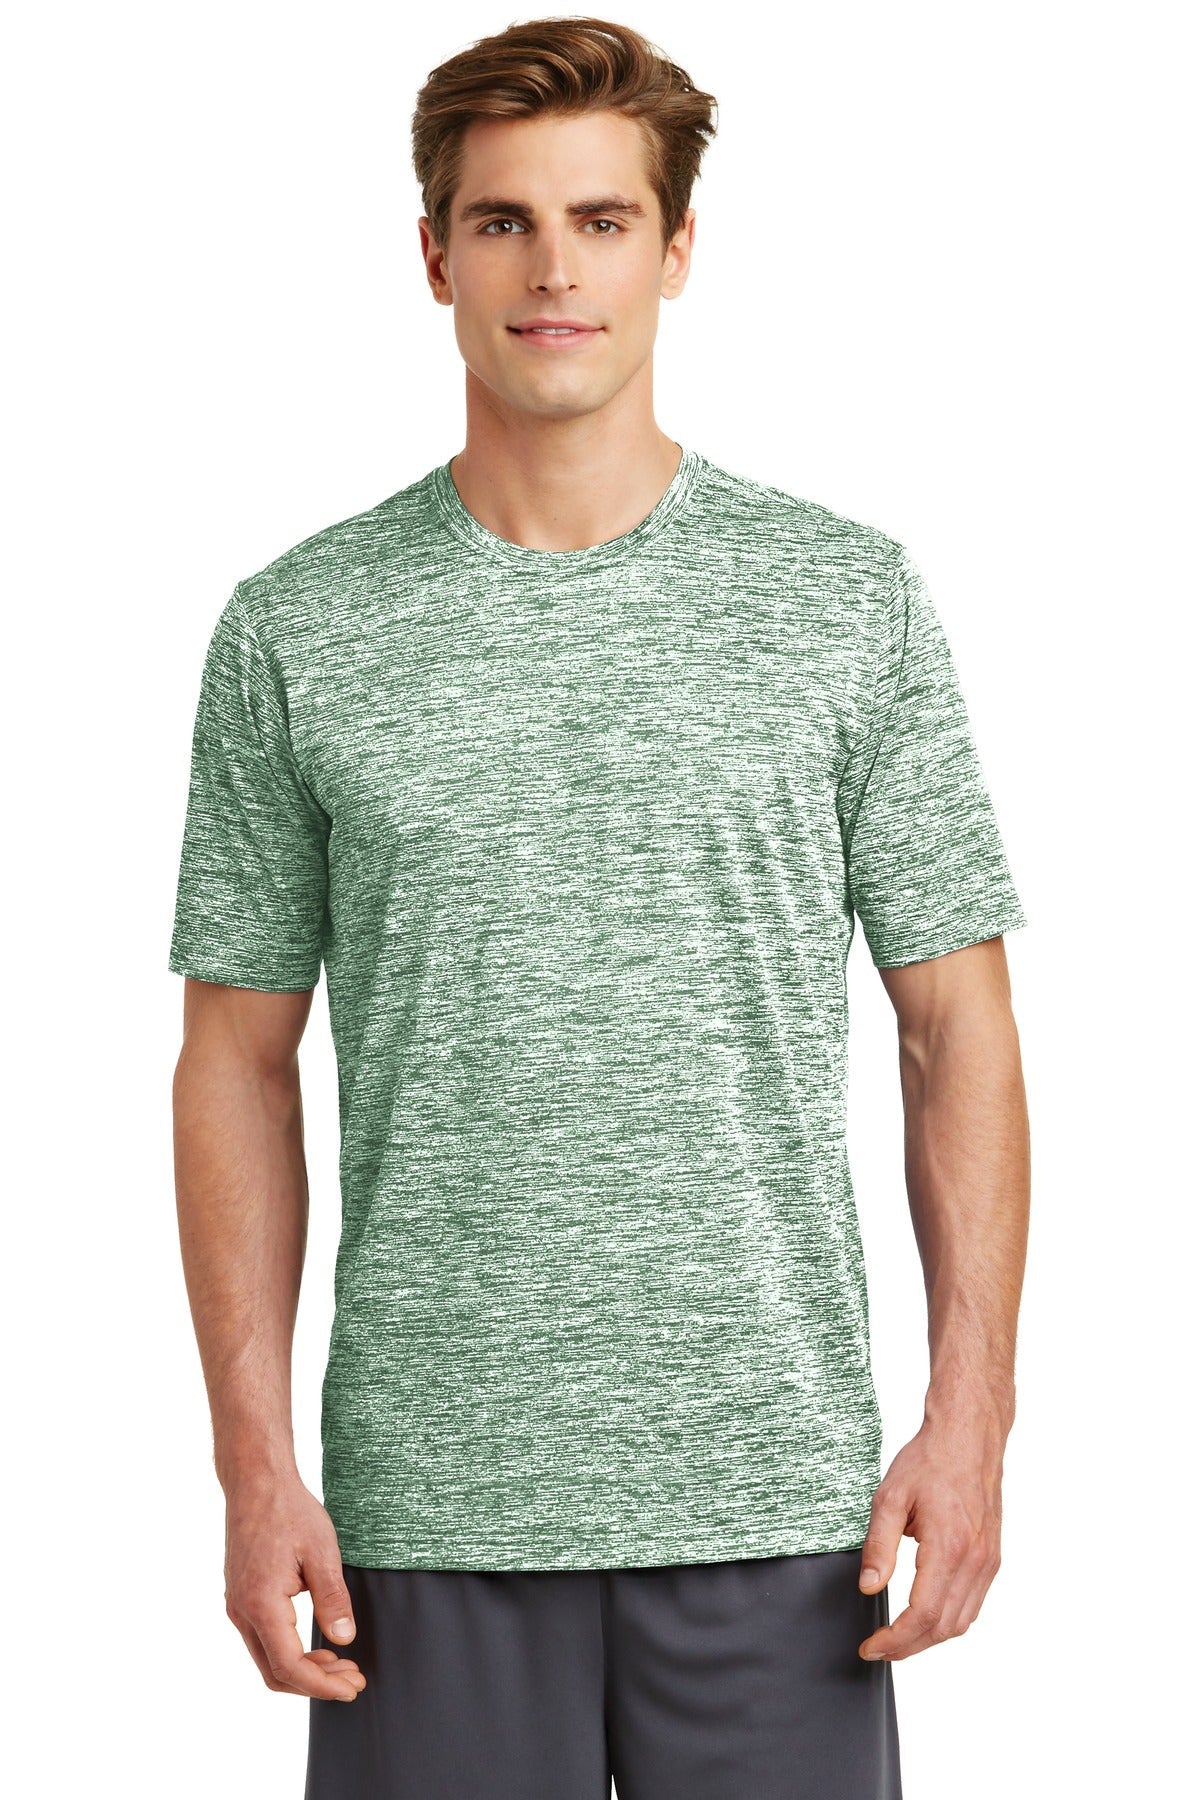 Sport-Tek® PosiCharge® Electric Heather Tee. ST390 [Forest Green Electric] - DFW Impression